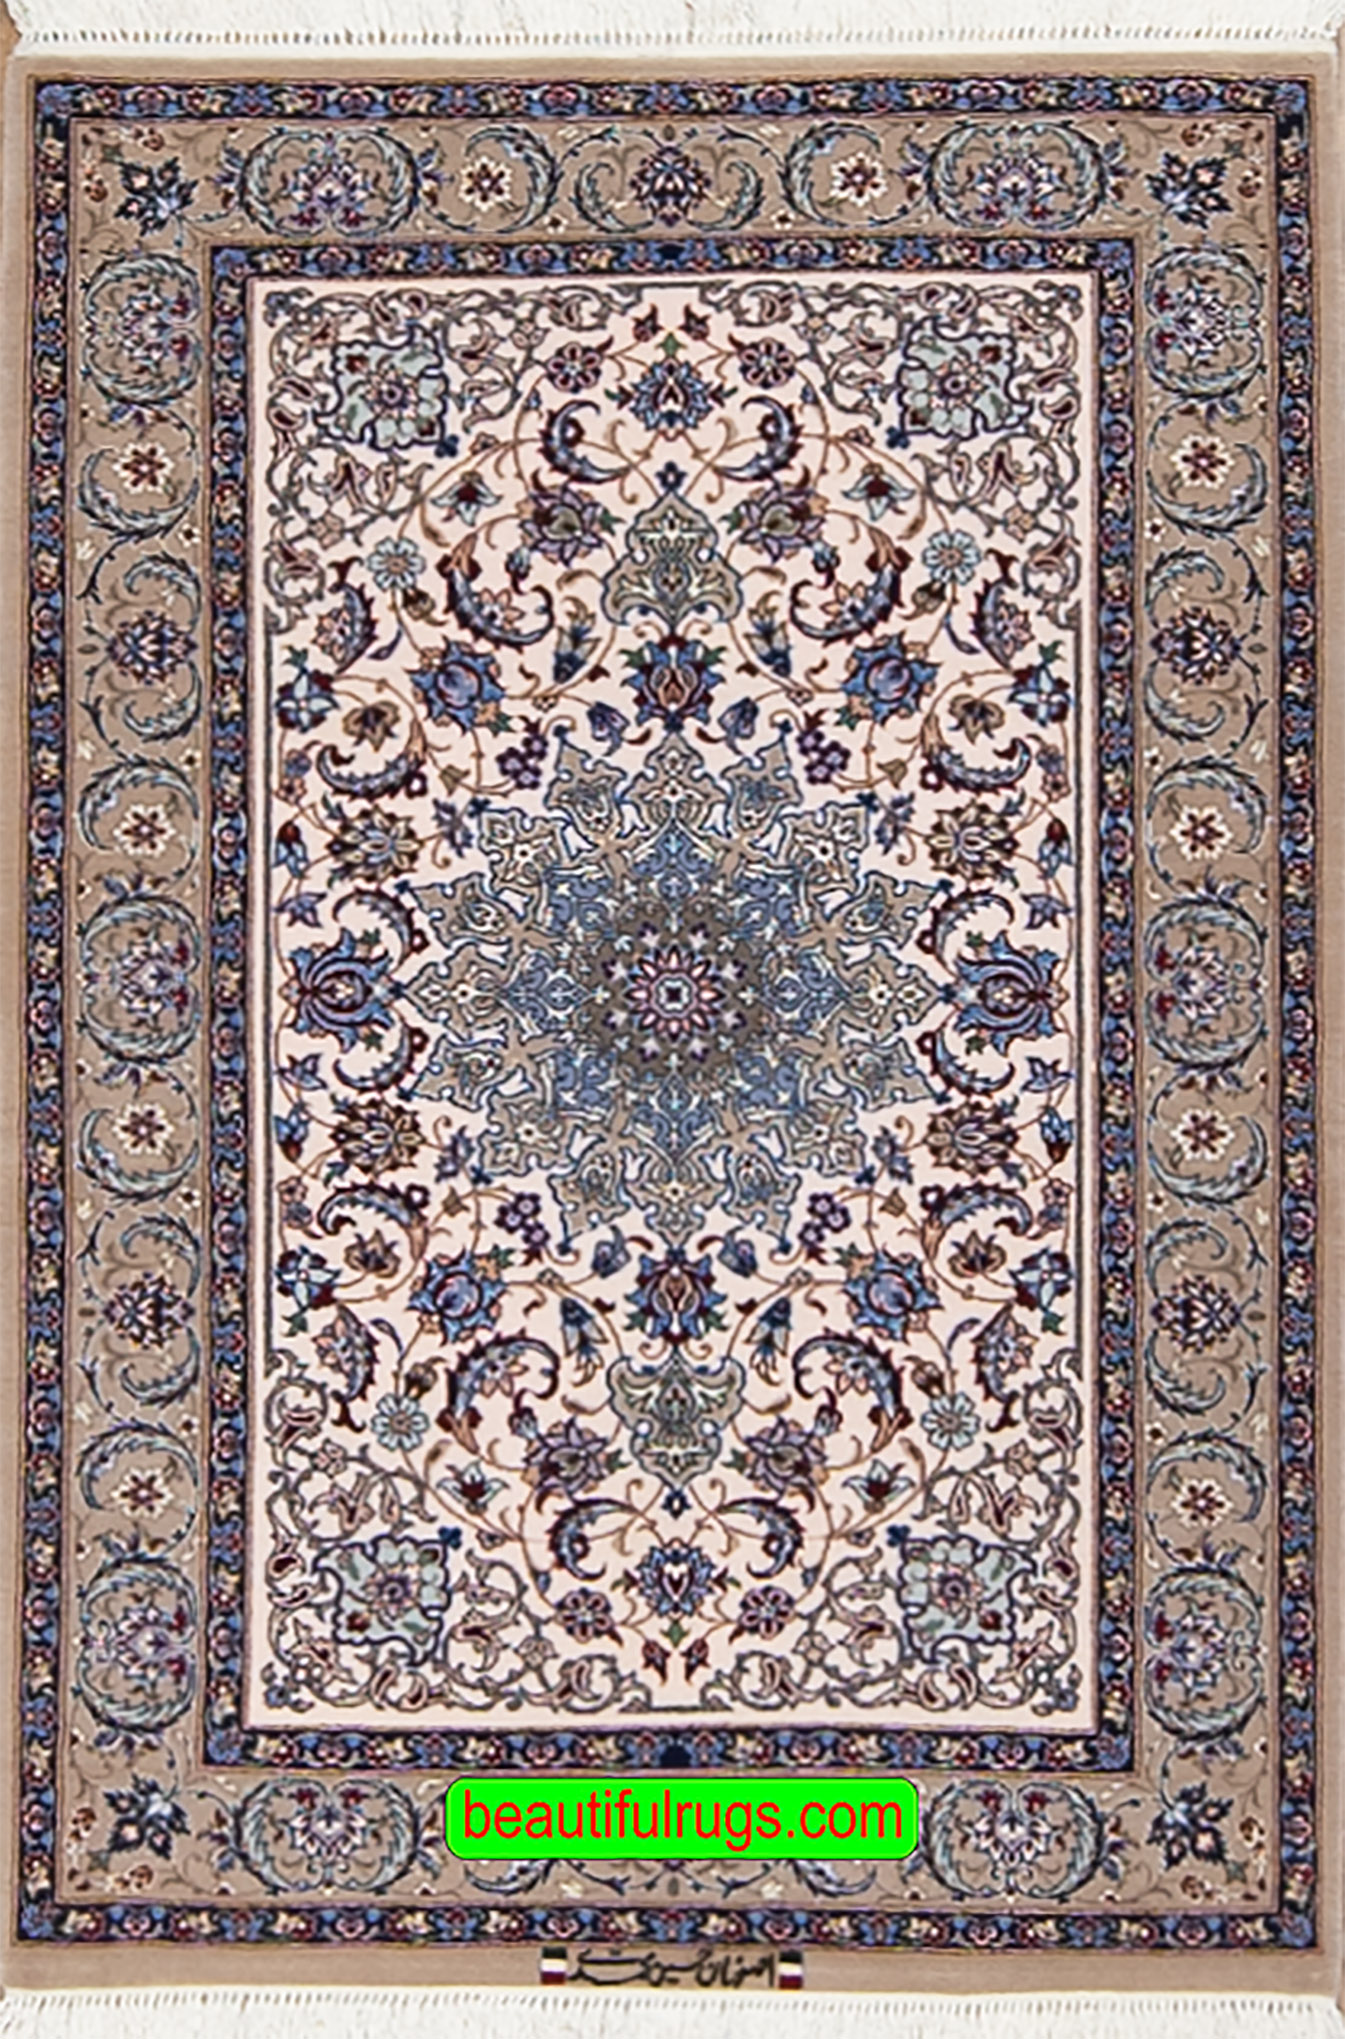 Handmade Persian Isfahan wool and silk rug in beige and blue color. Size 2.10x4.2.